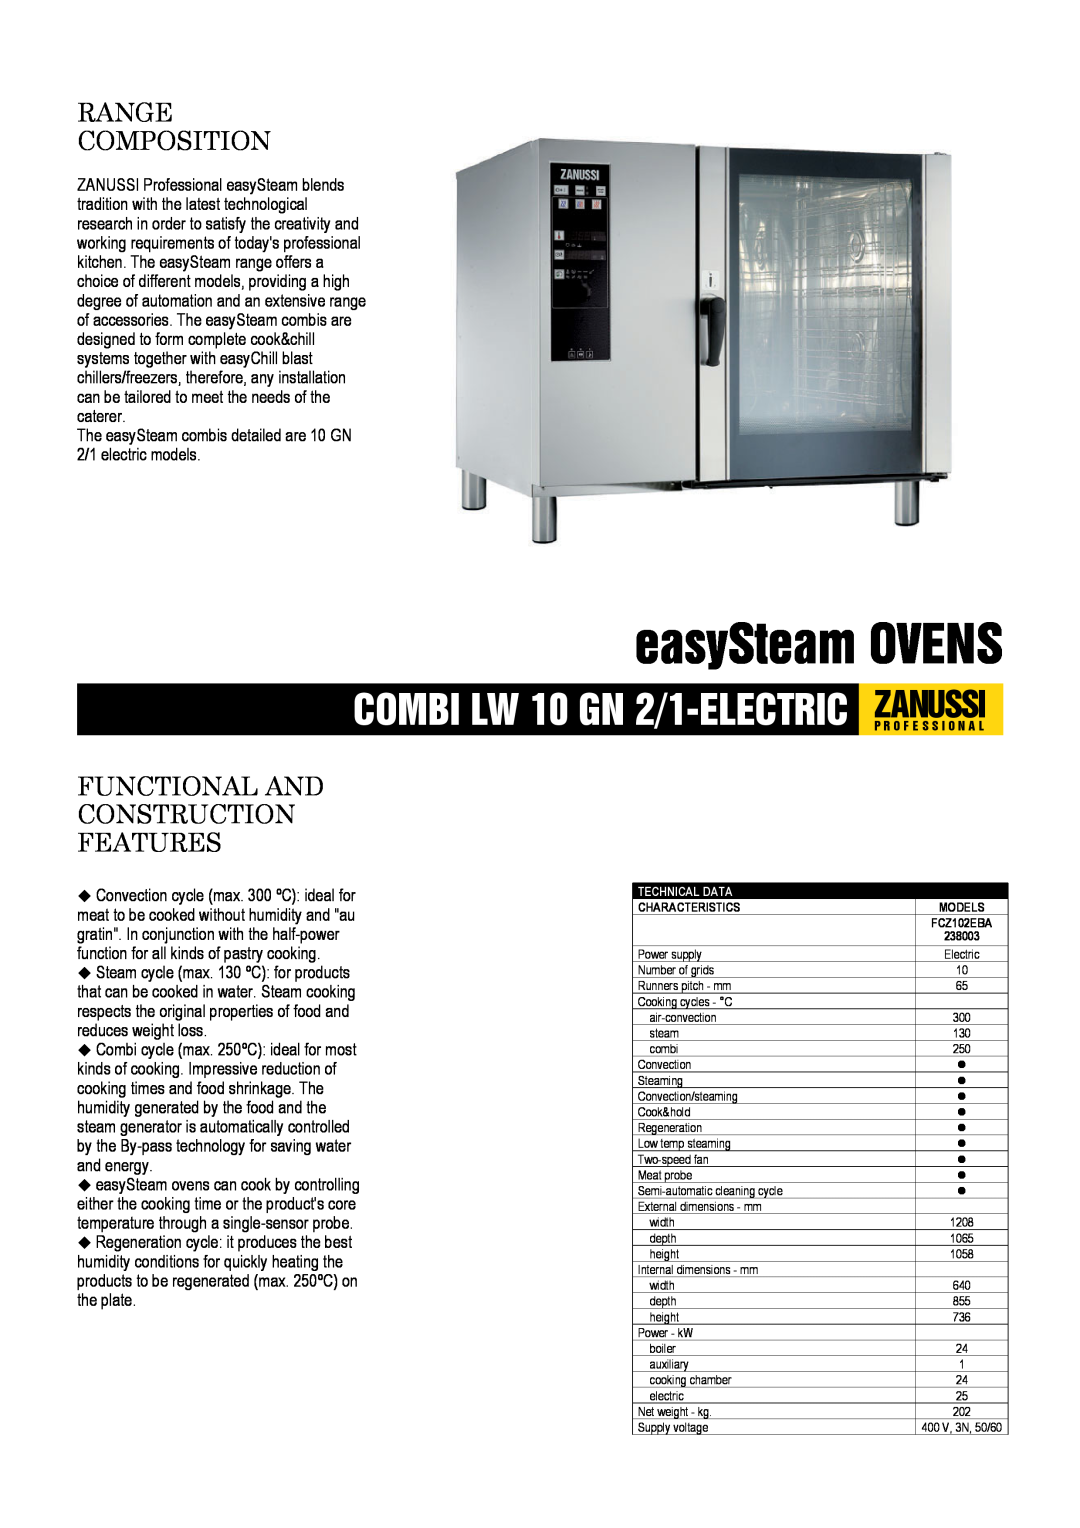 Zanussi 238003, FCZ102EBA dimensions easySteam OVENS, Range Composition, Functional And Construction Features 